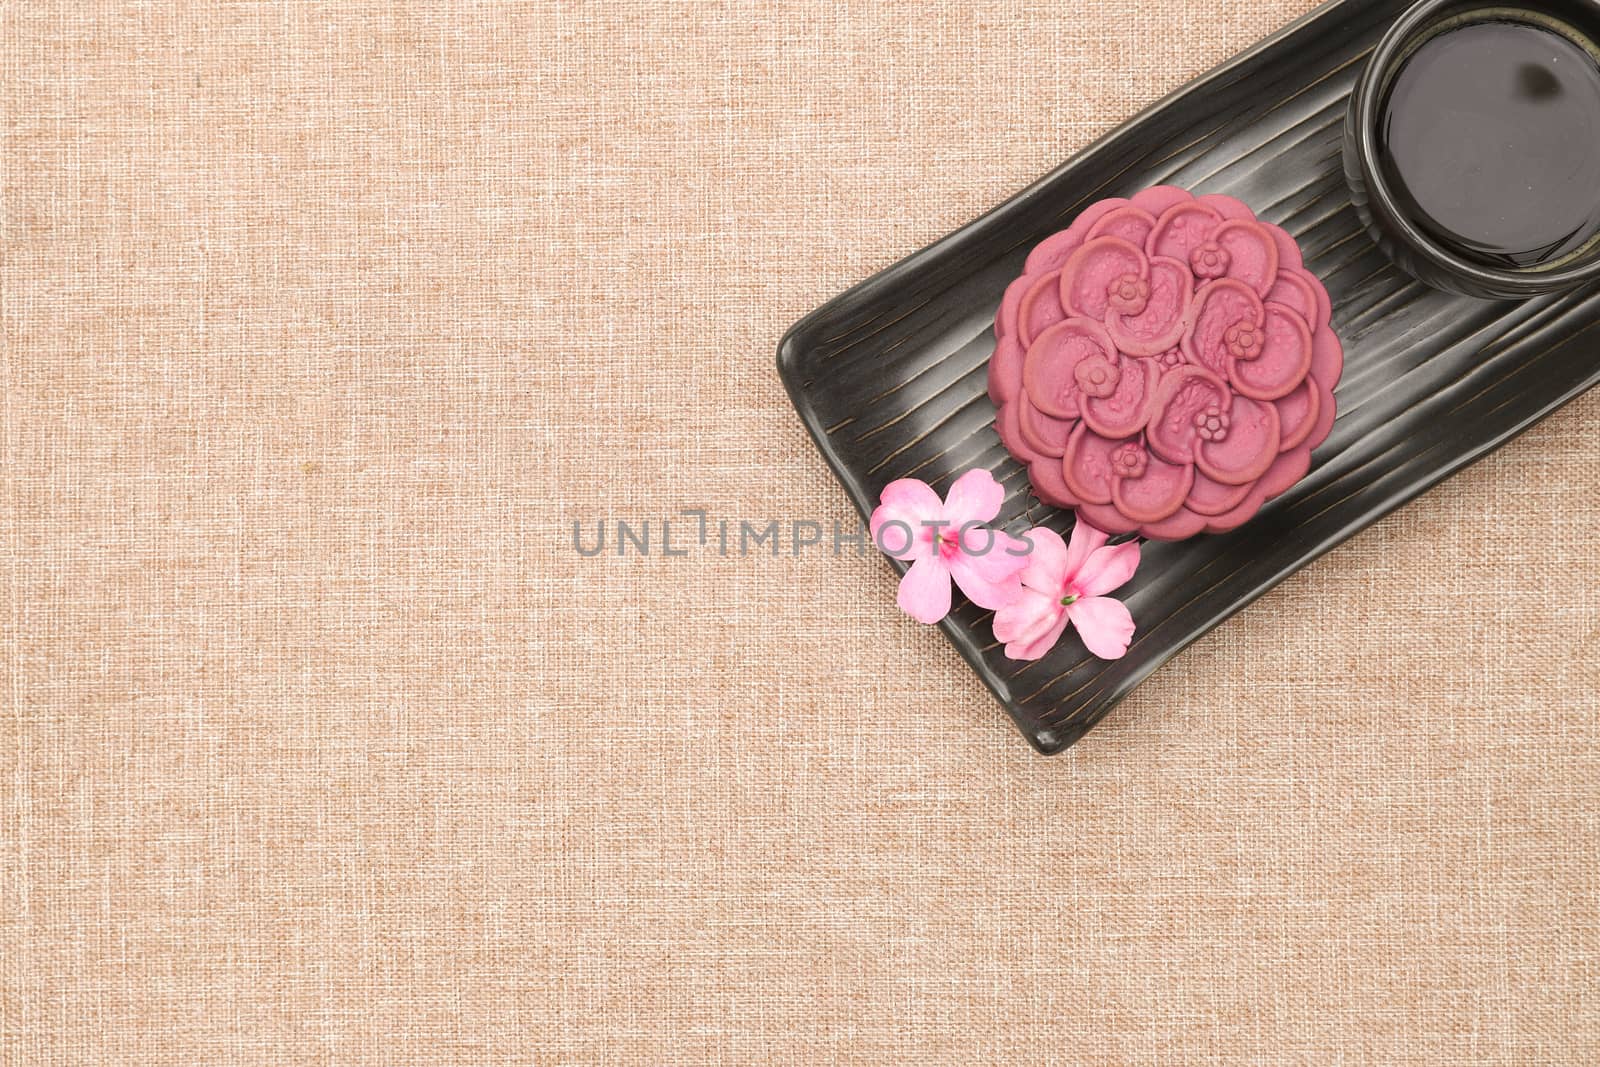 A non-traditional chinese moon cake made of purple japanese yam on a black ceramic plate with a cup of espresso. Top view, light brown linen background.